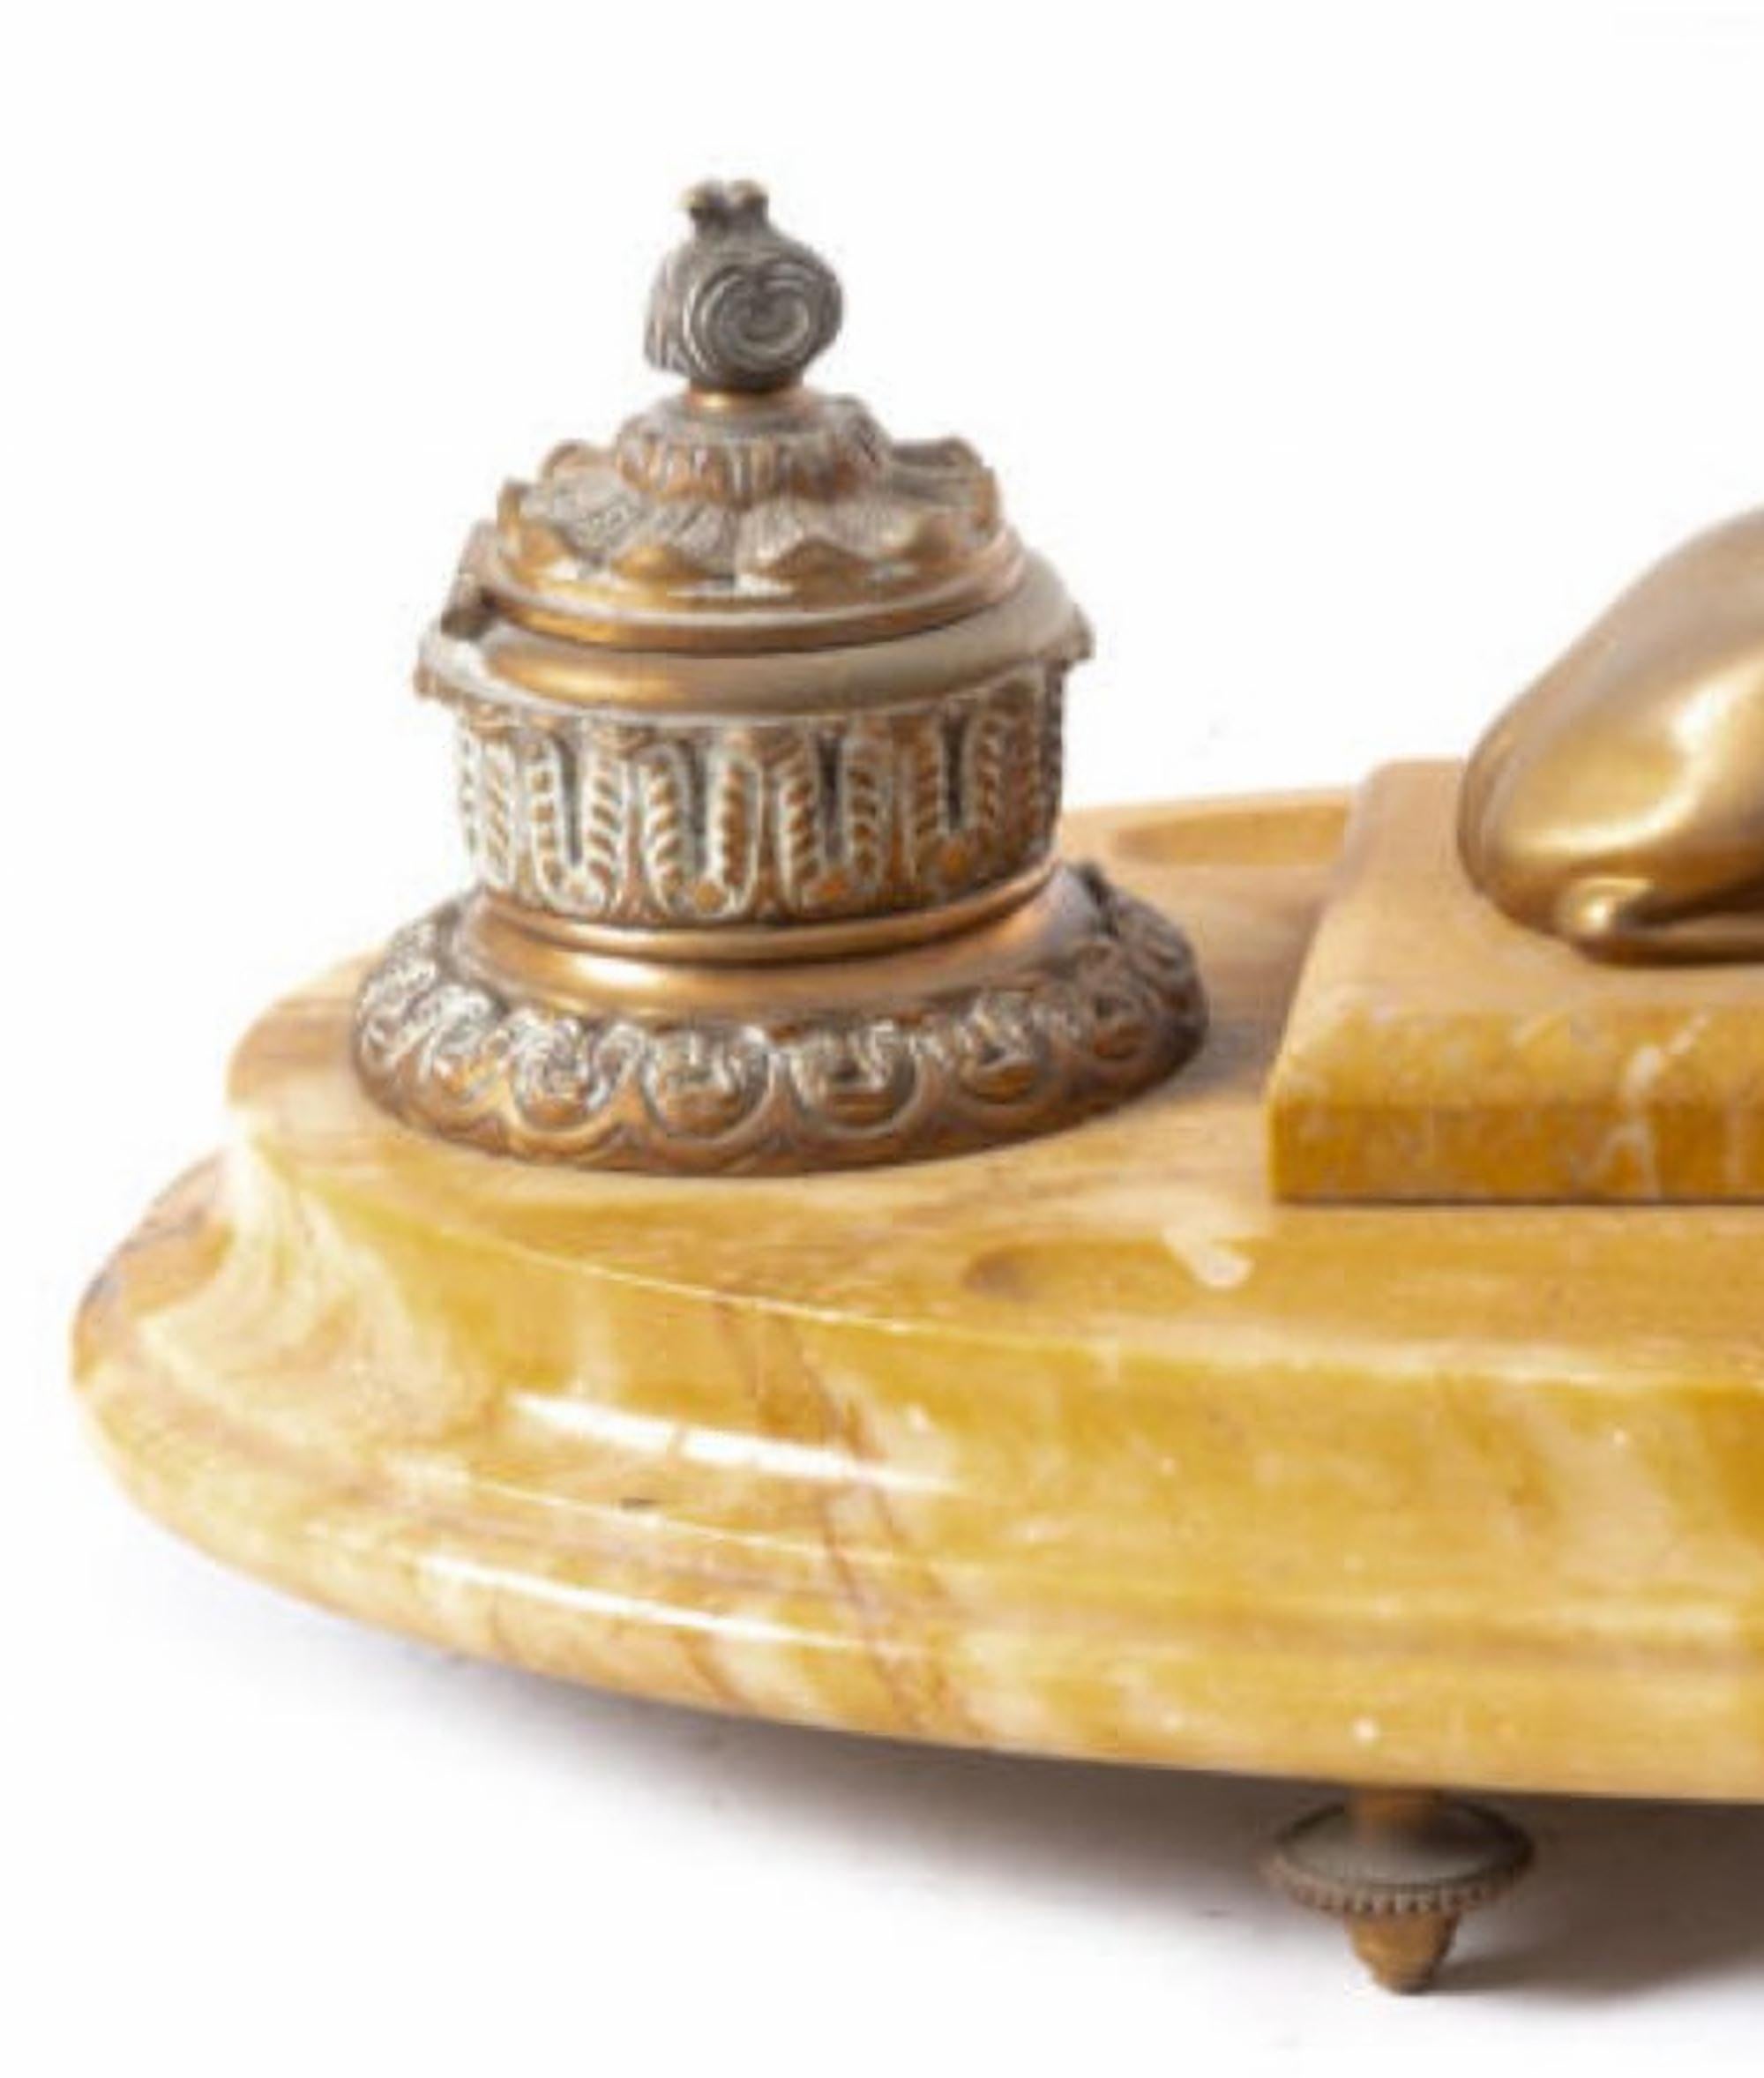 Inkwell
FRENCH MANUFACTURING OF THE EARLY 1900s
Empire style inkwell in yellow Siena marble with gilded bronze inkwells and sphinx.
48 x 23 cm Height 20.